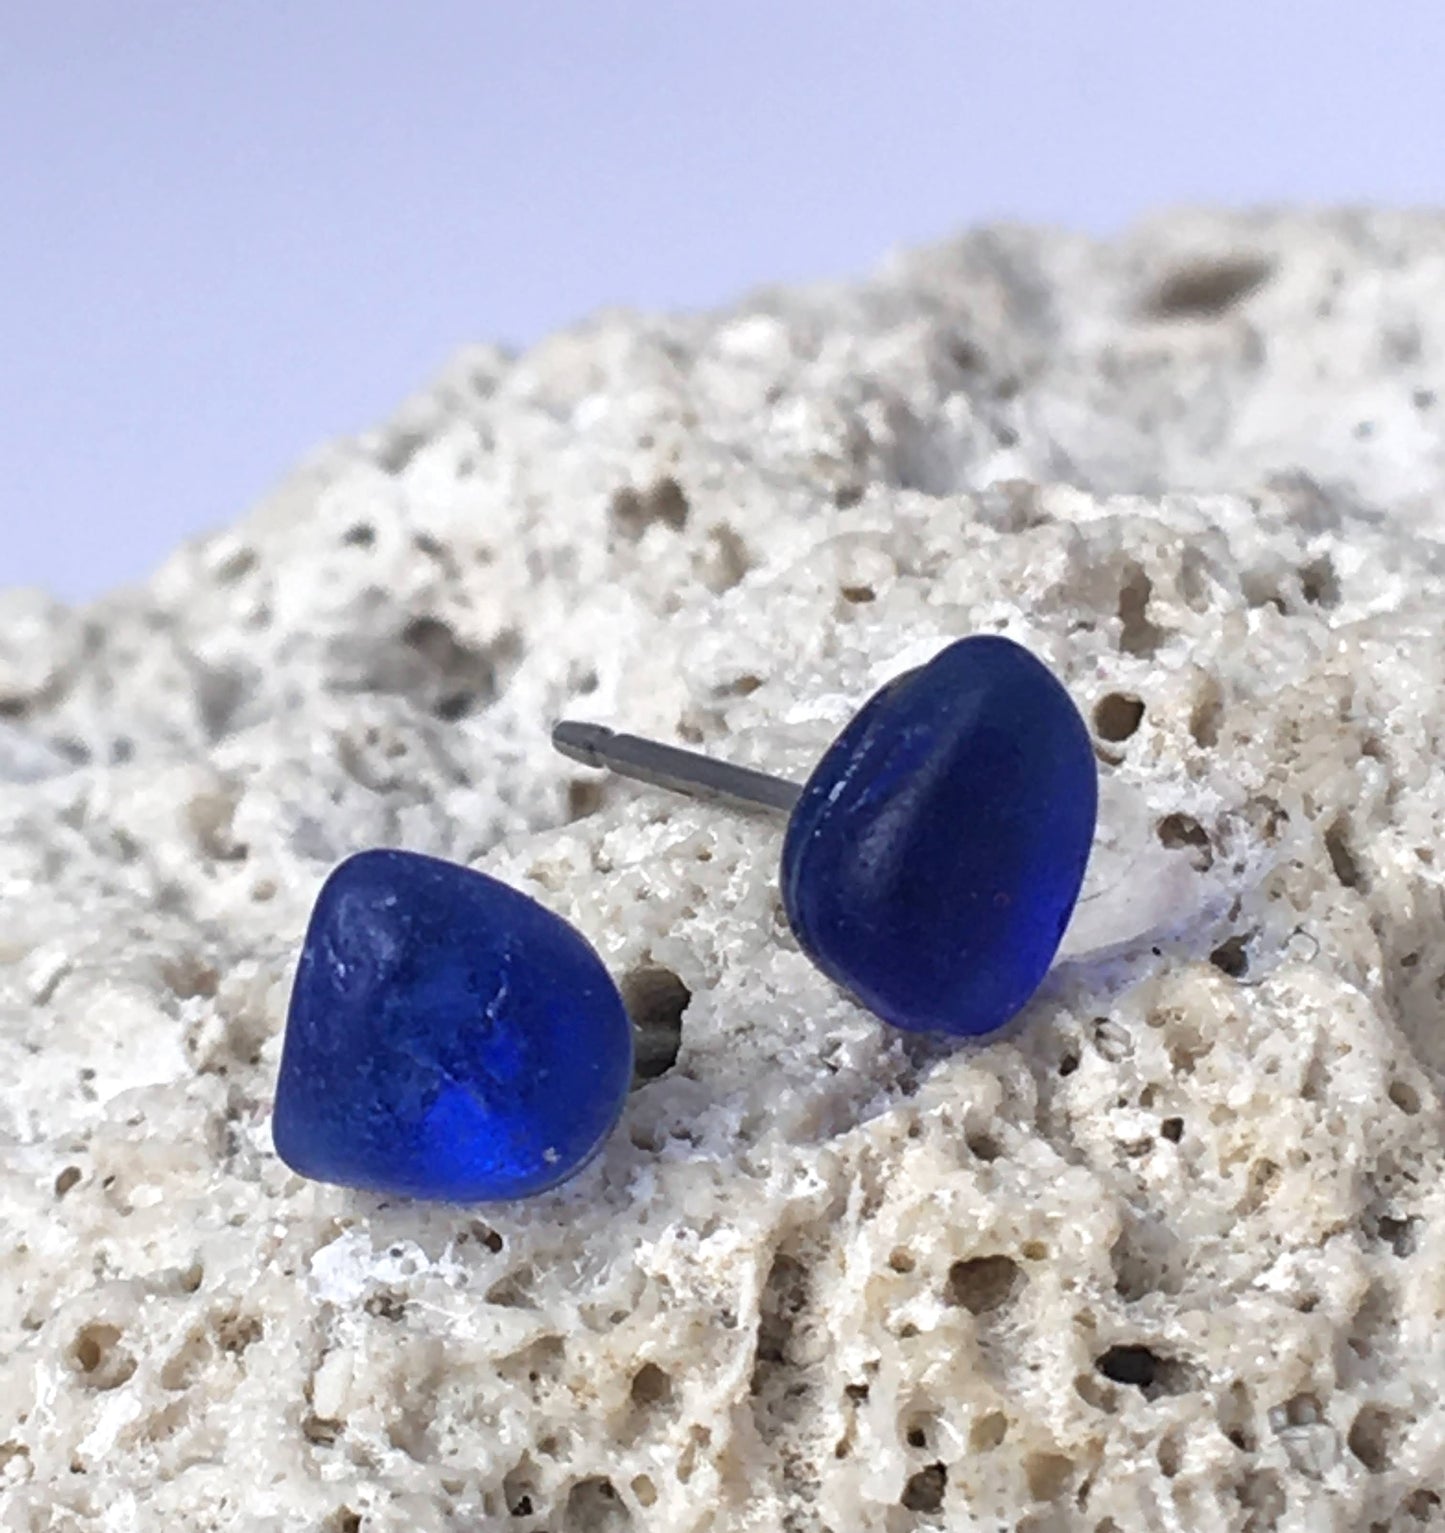 Pebble Stud Earrings - Cobalt blue sea glass from Cape Breton, Nova Scotia, Canada on surgical steel posts with butterfly clutch